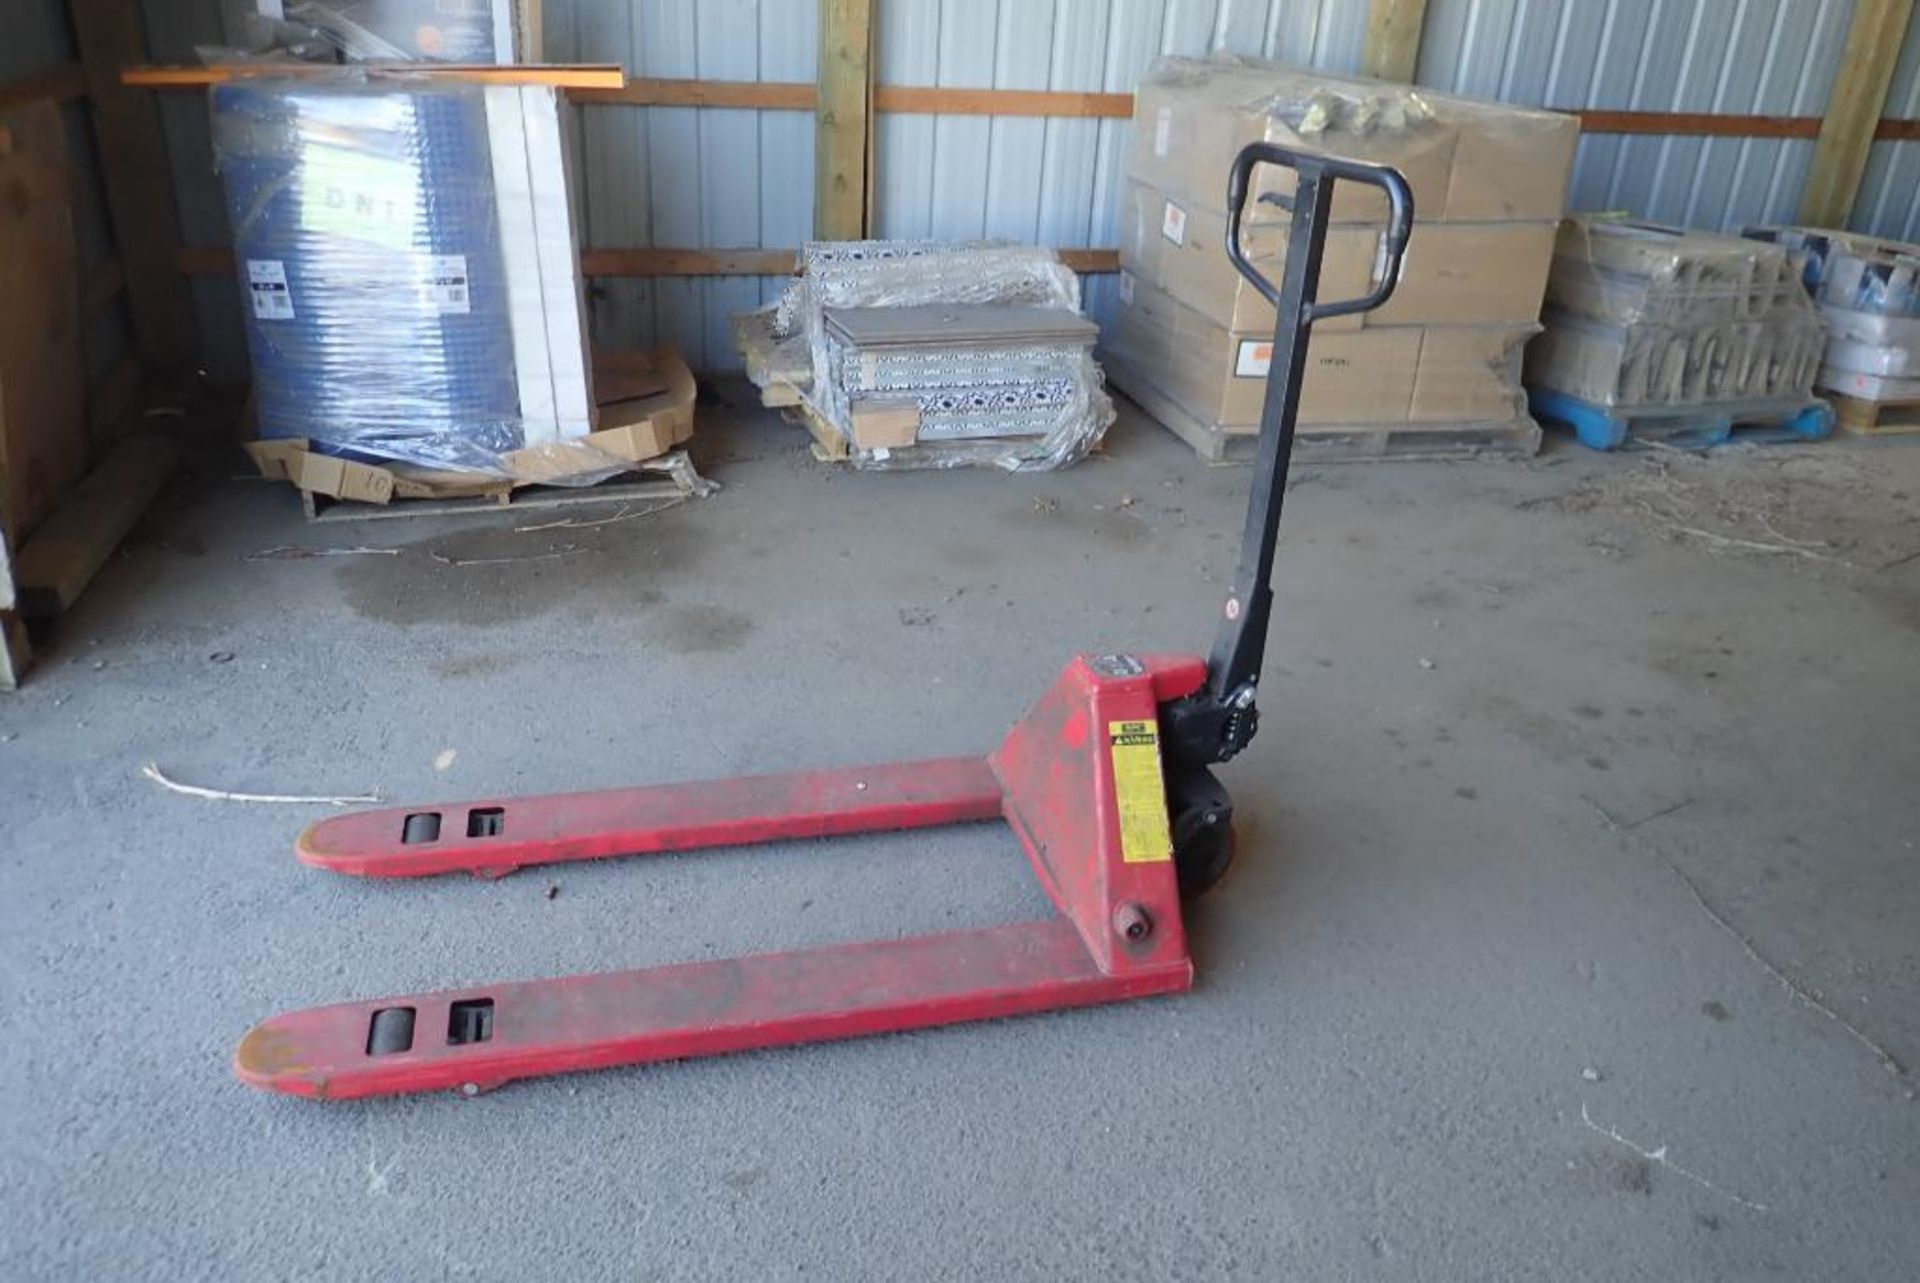 Pallet Jack. *BEING USED FOR LOADOUT, CANNOT BE REMOVED UNTIL SEPT 27/22 @ 3PM*